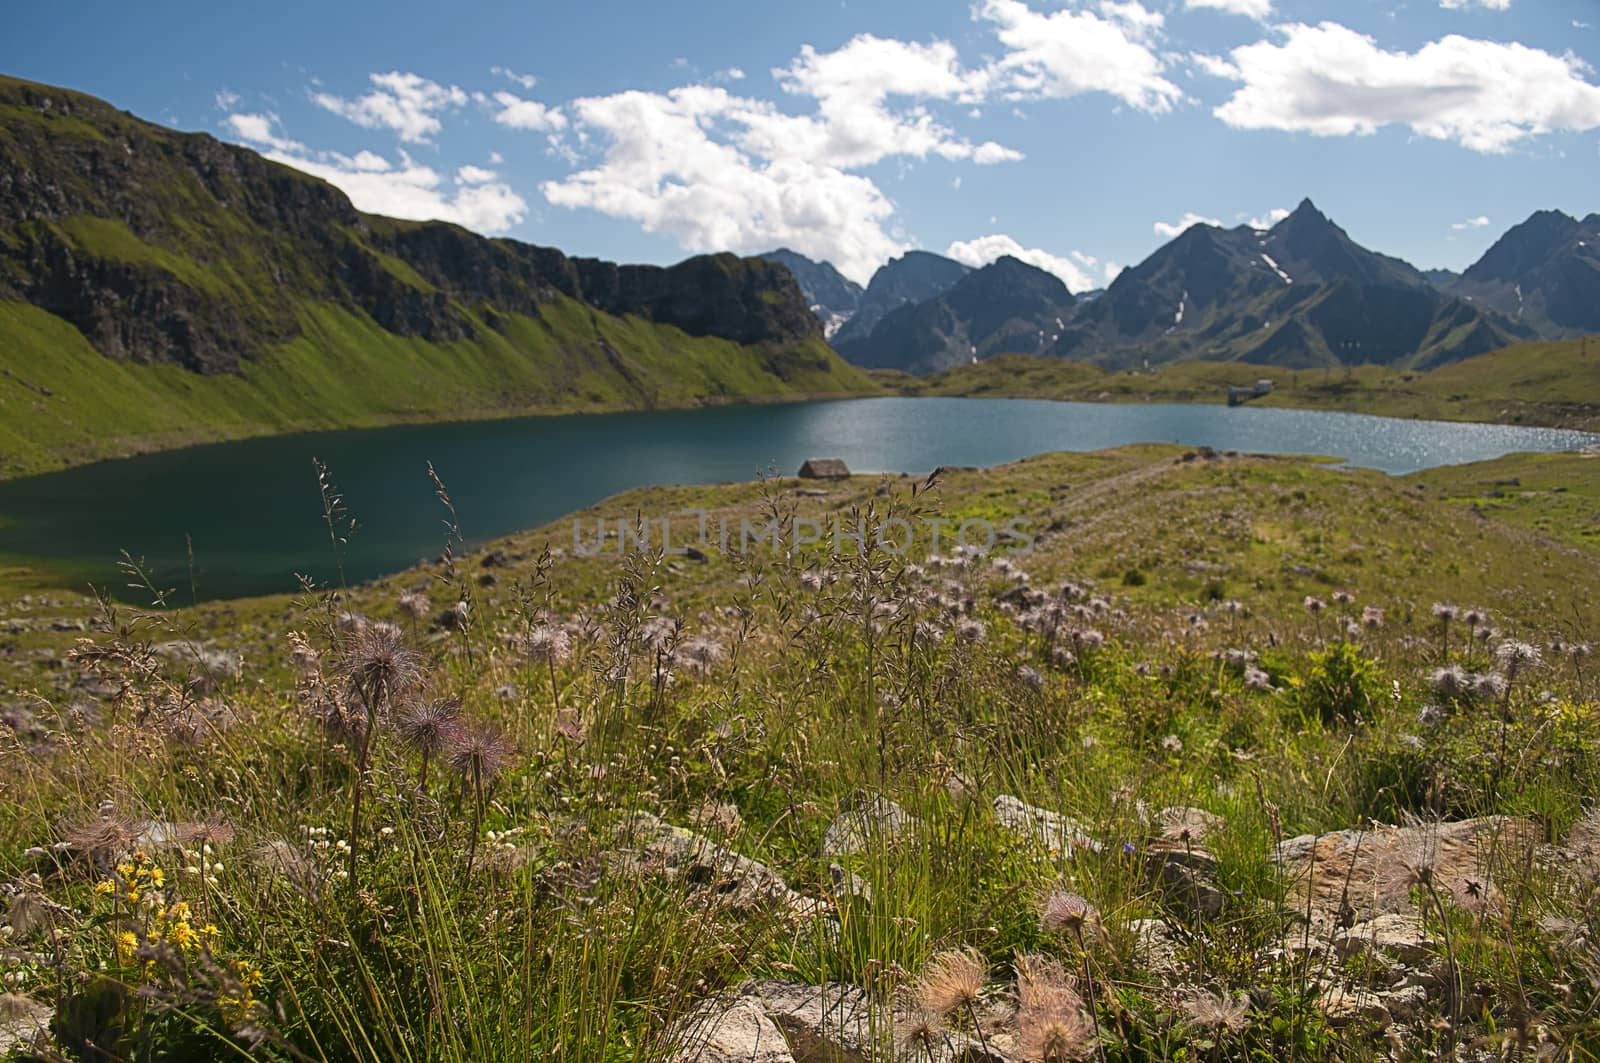 Alpine meadow with lake in background, Val Formazza, Italy